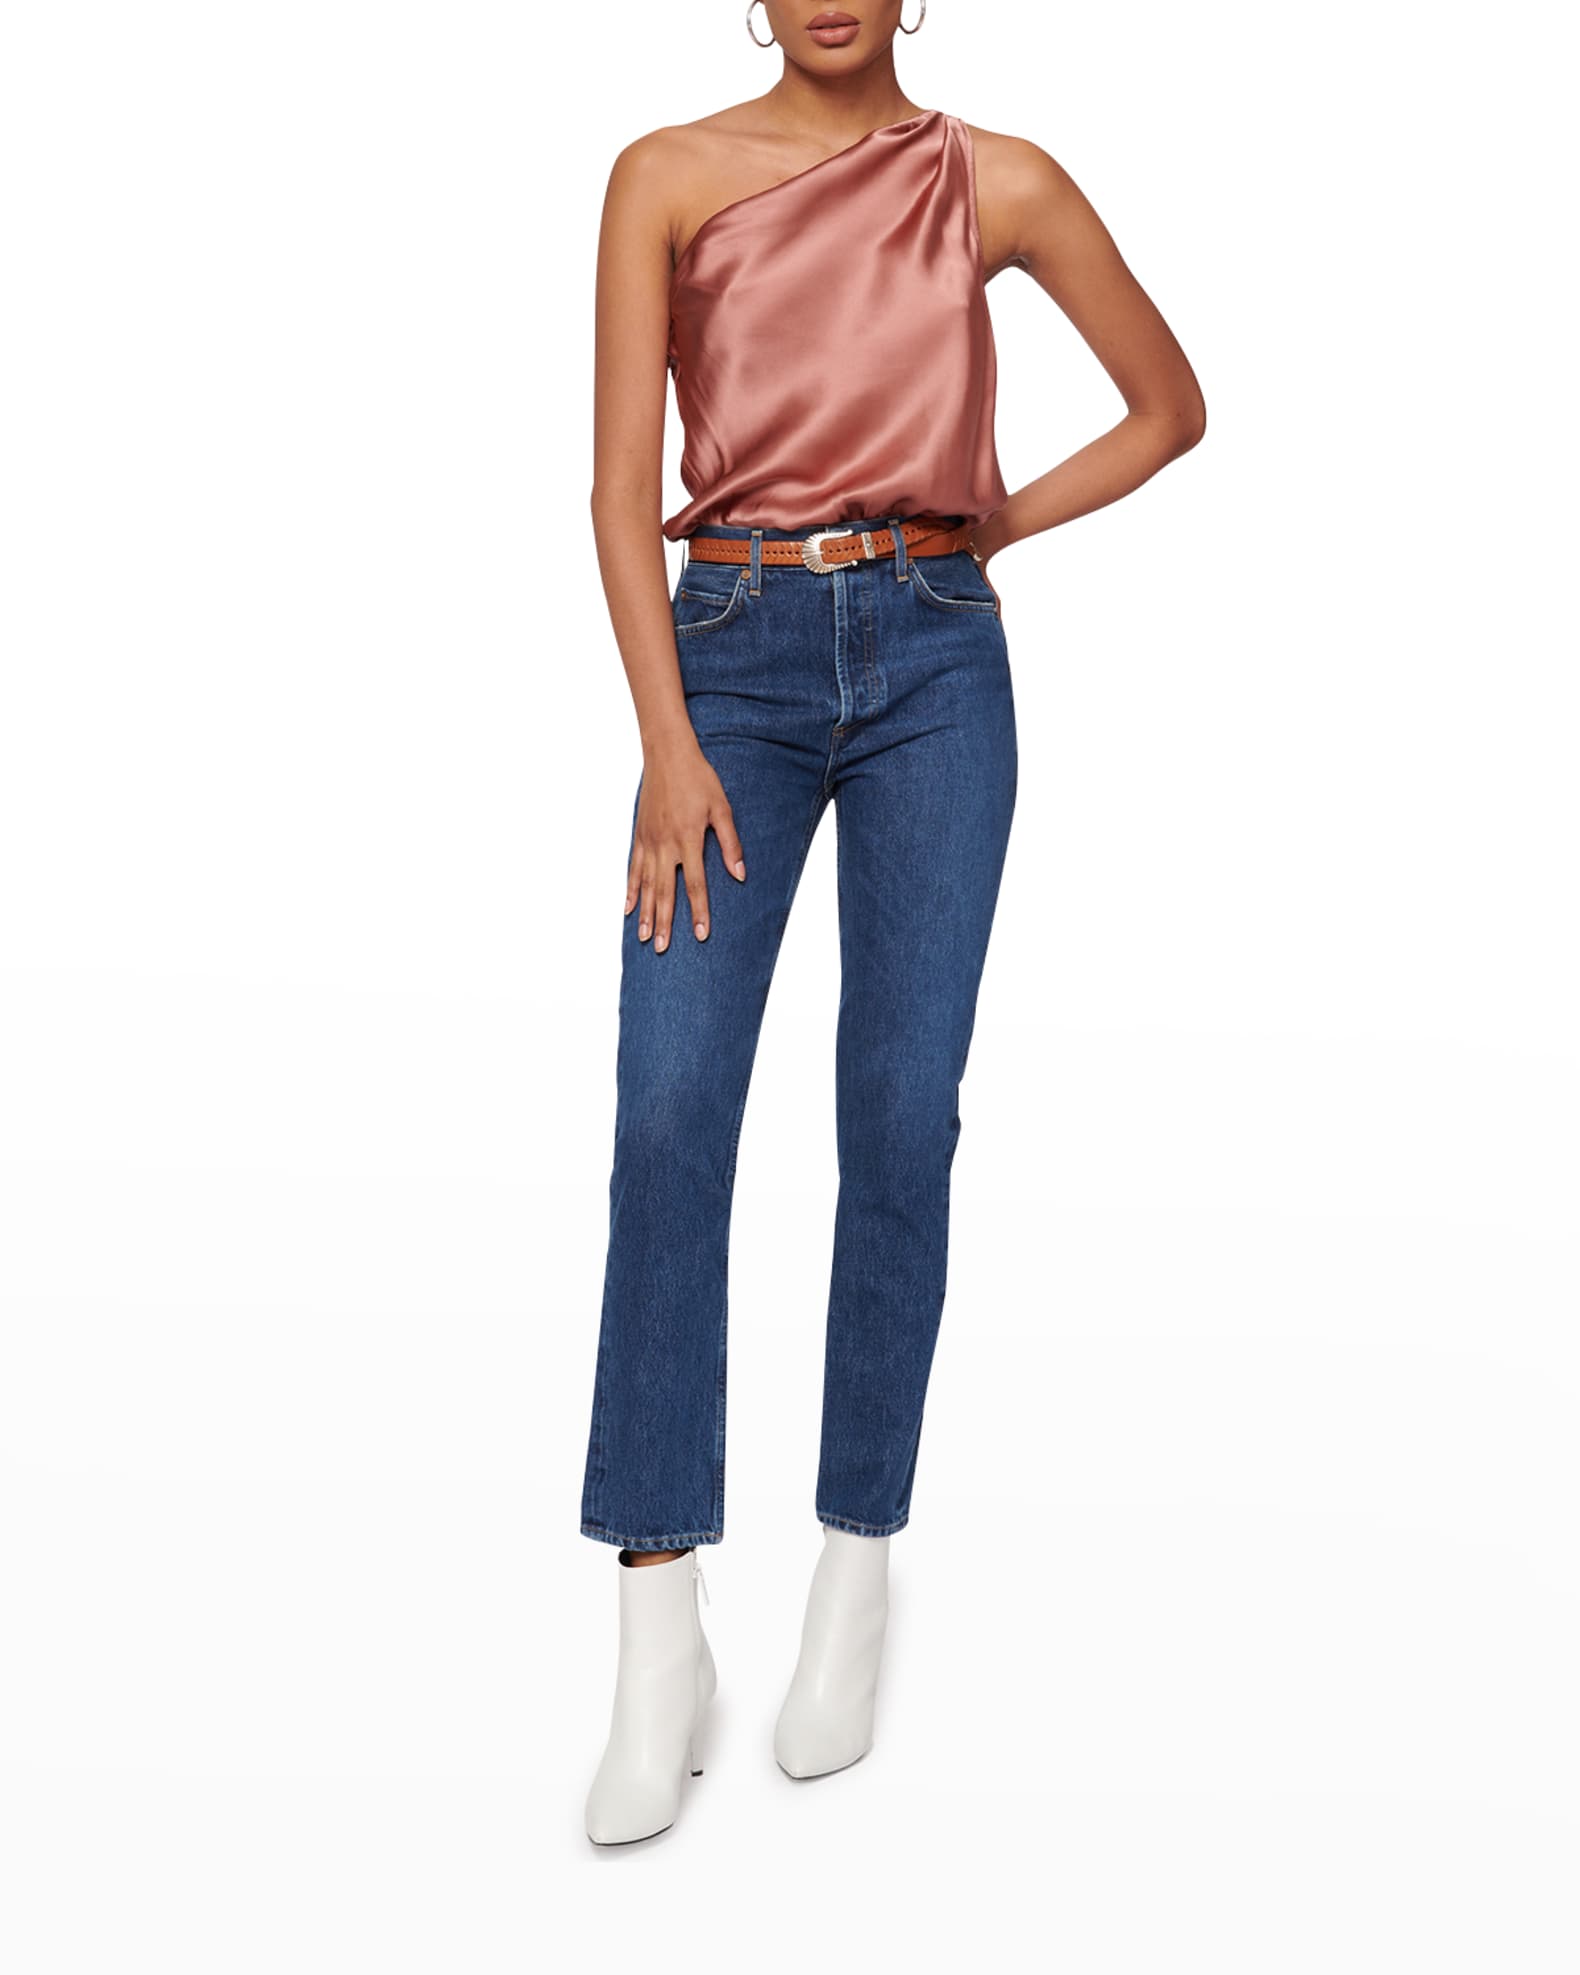 CAMI NYC Darby Bodysuit In Mariposa - ShopStyle Tops